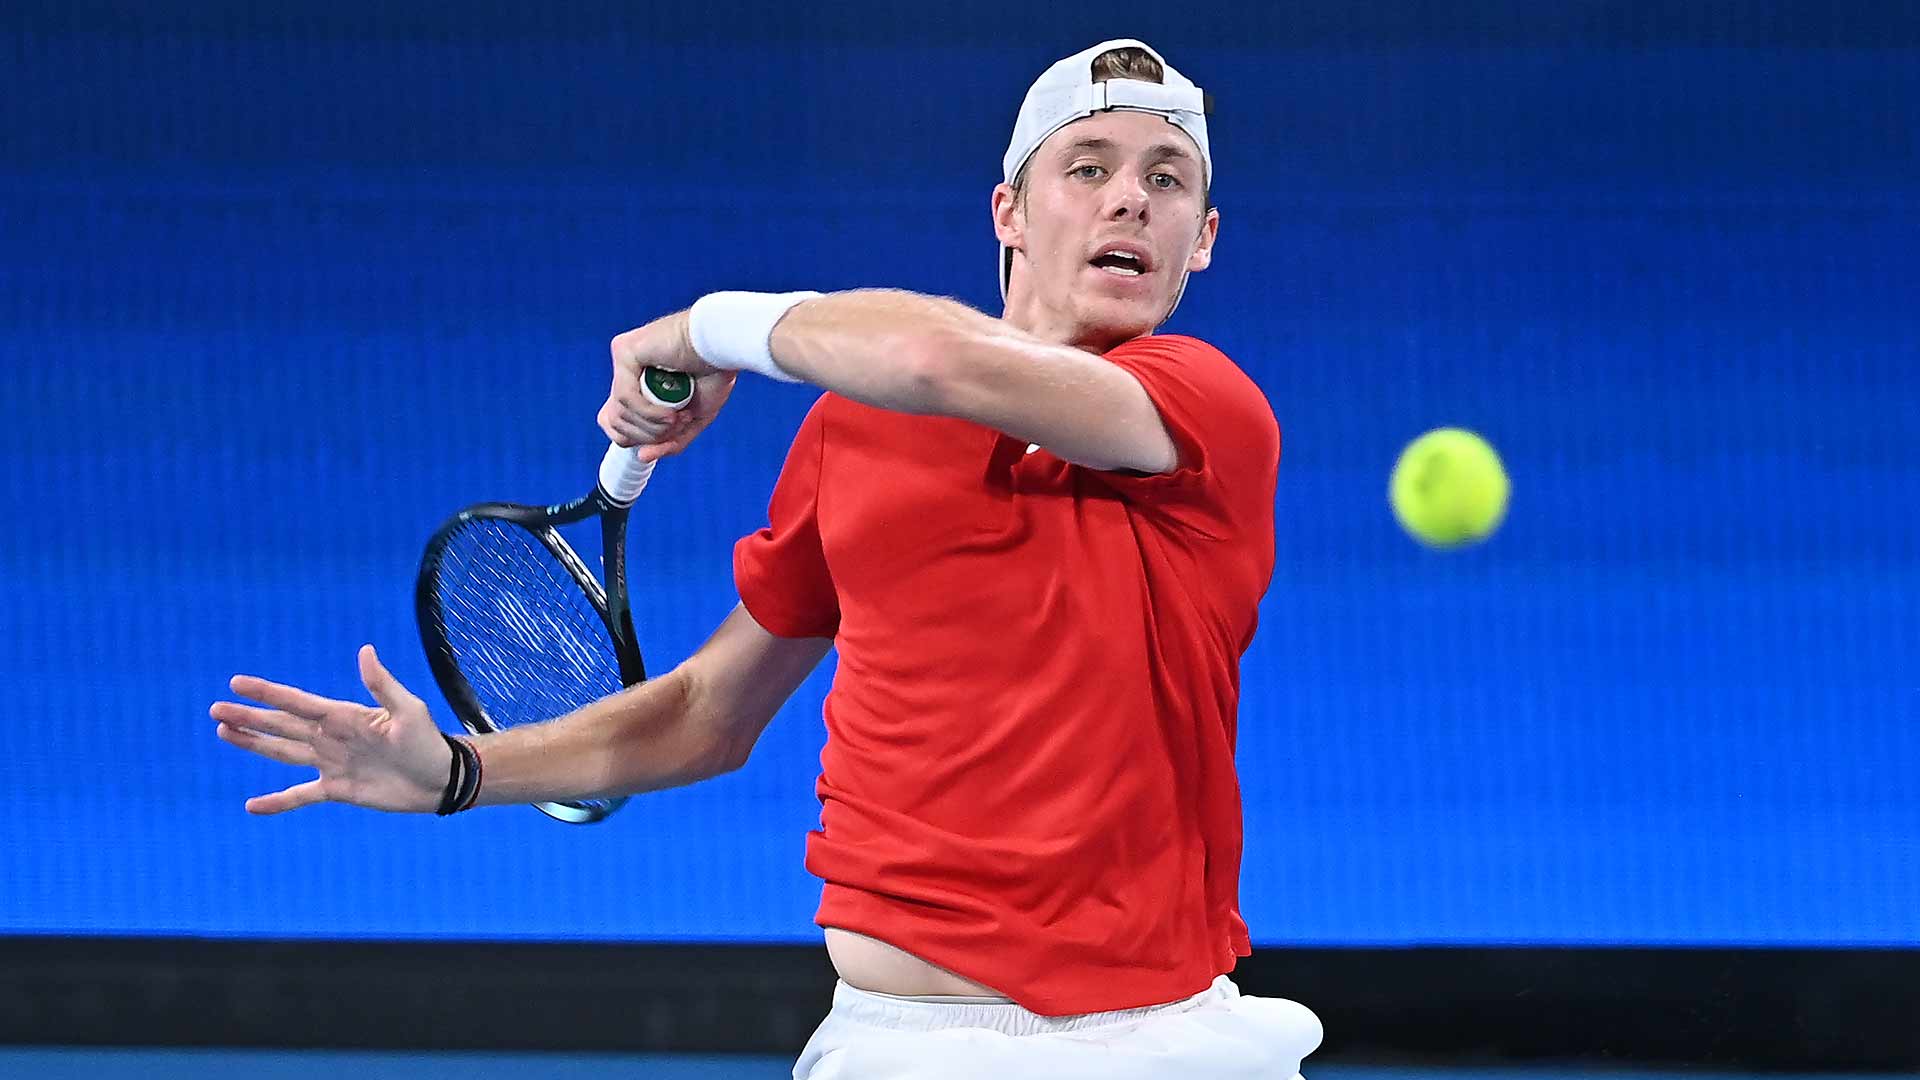 Denis Shapovalov had a hot start to 2022, helping Canada win the ATP Cup and reaching the Australian Open quarter-finals.